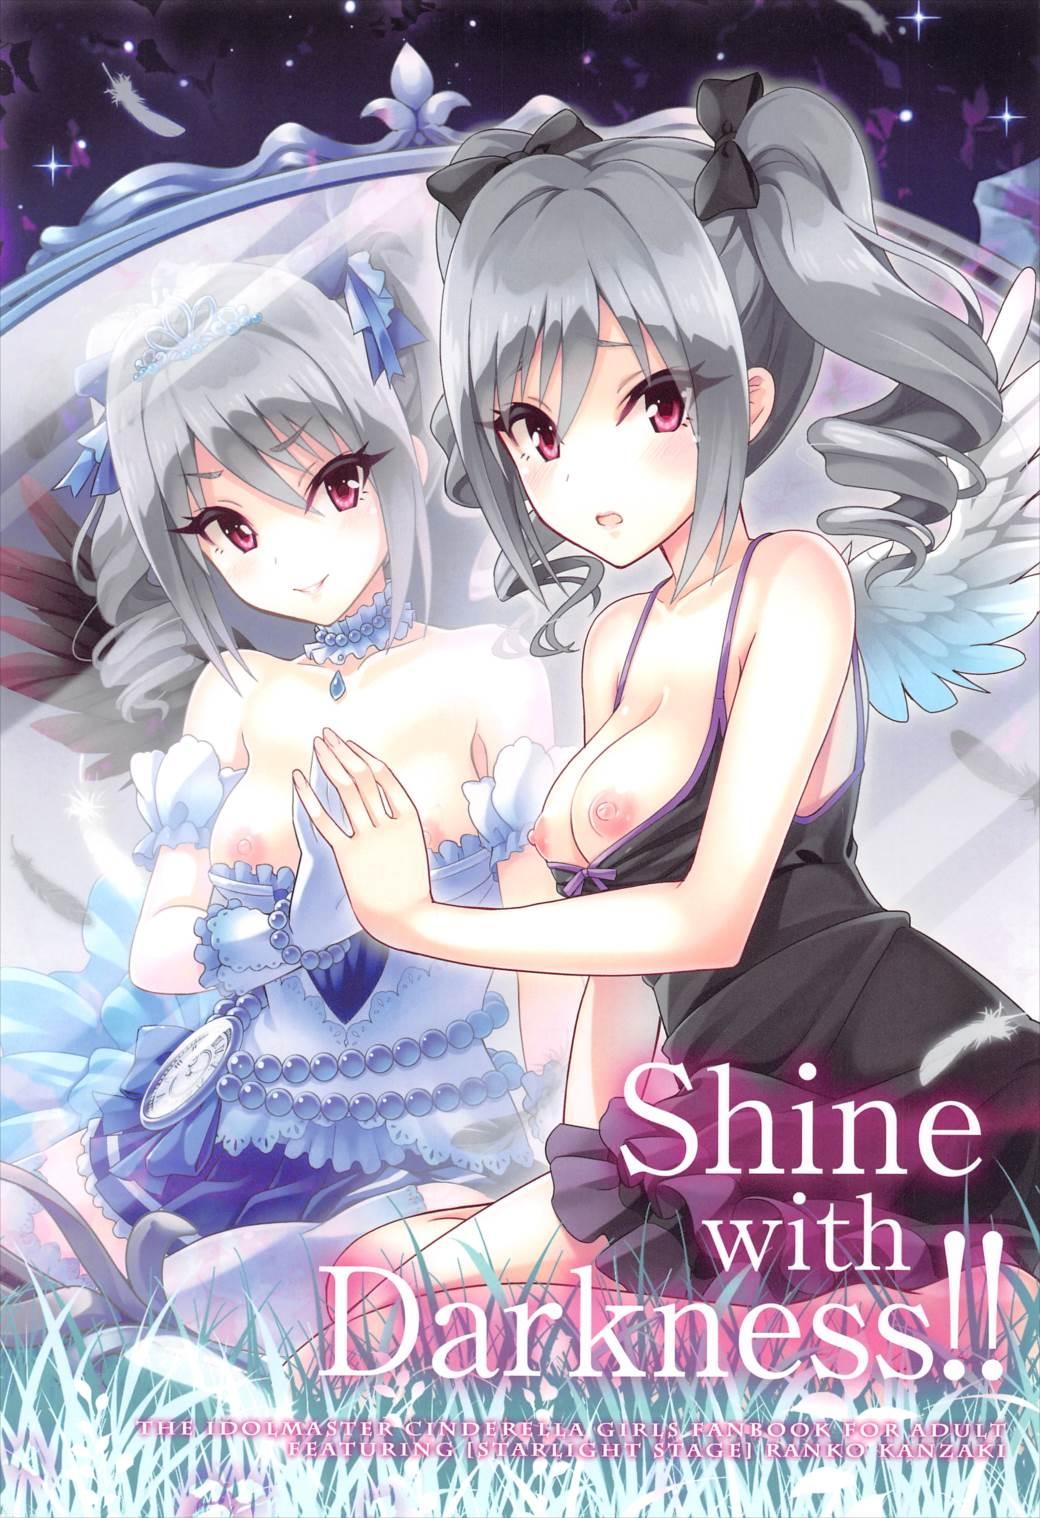 Shine with Darkness!! 2